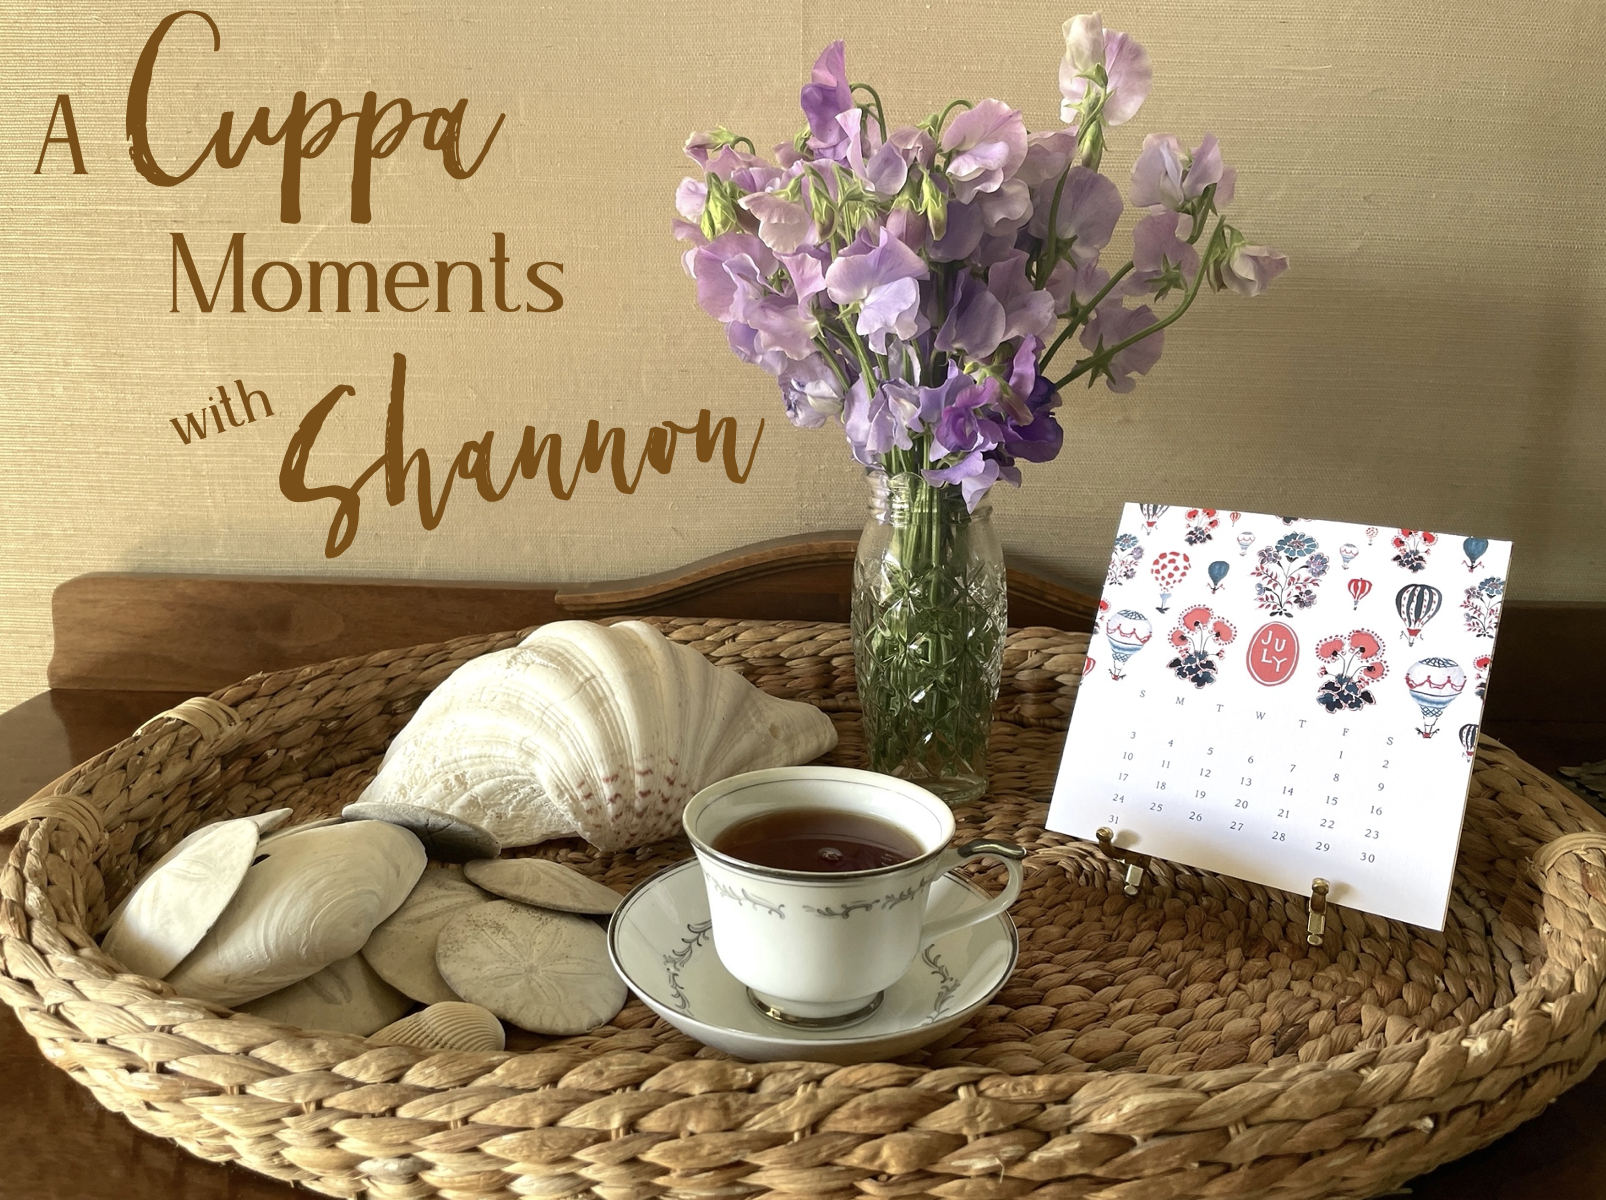 A Cuppa Moments w/Shannon, July 2022